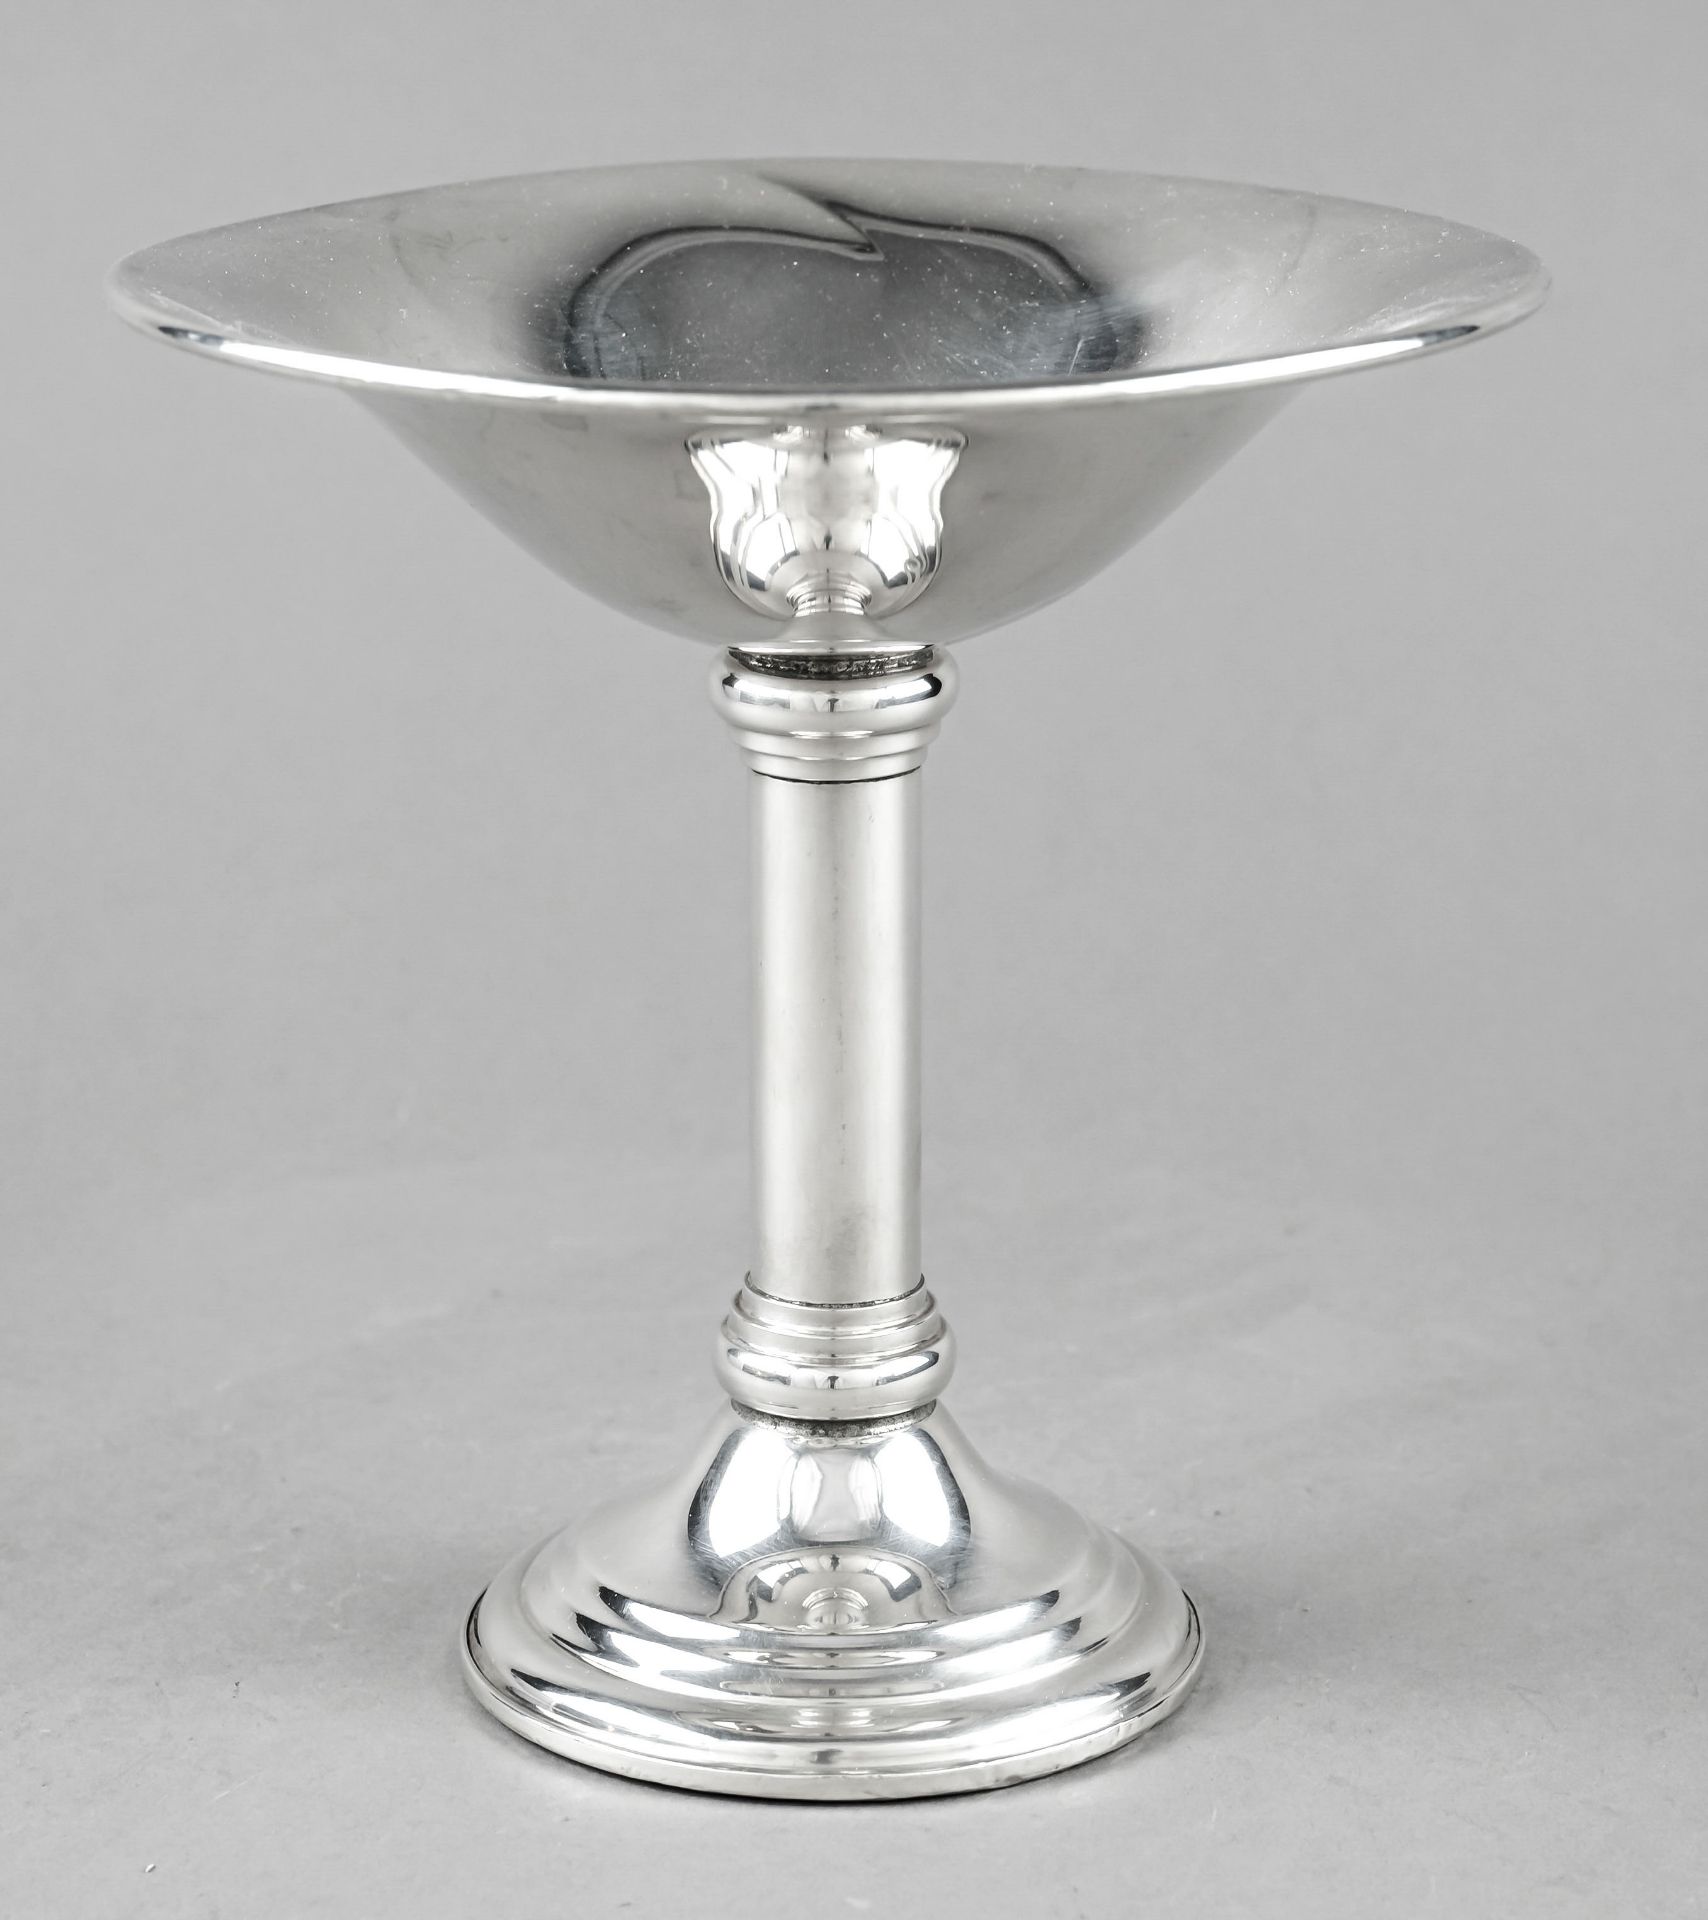 Top/confection bowl, USA, 20th c., sterling silver 925/000, round stepped and filled stand, columnar